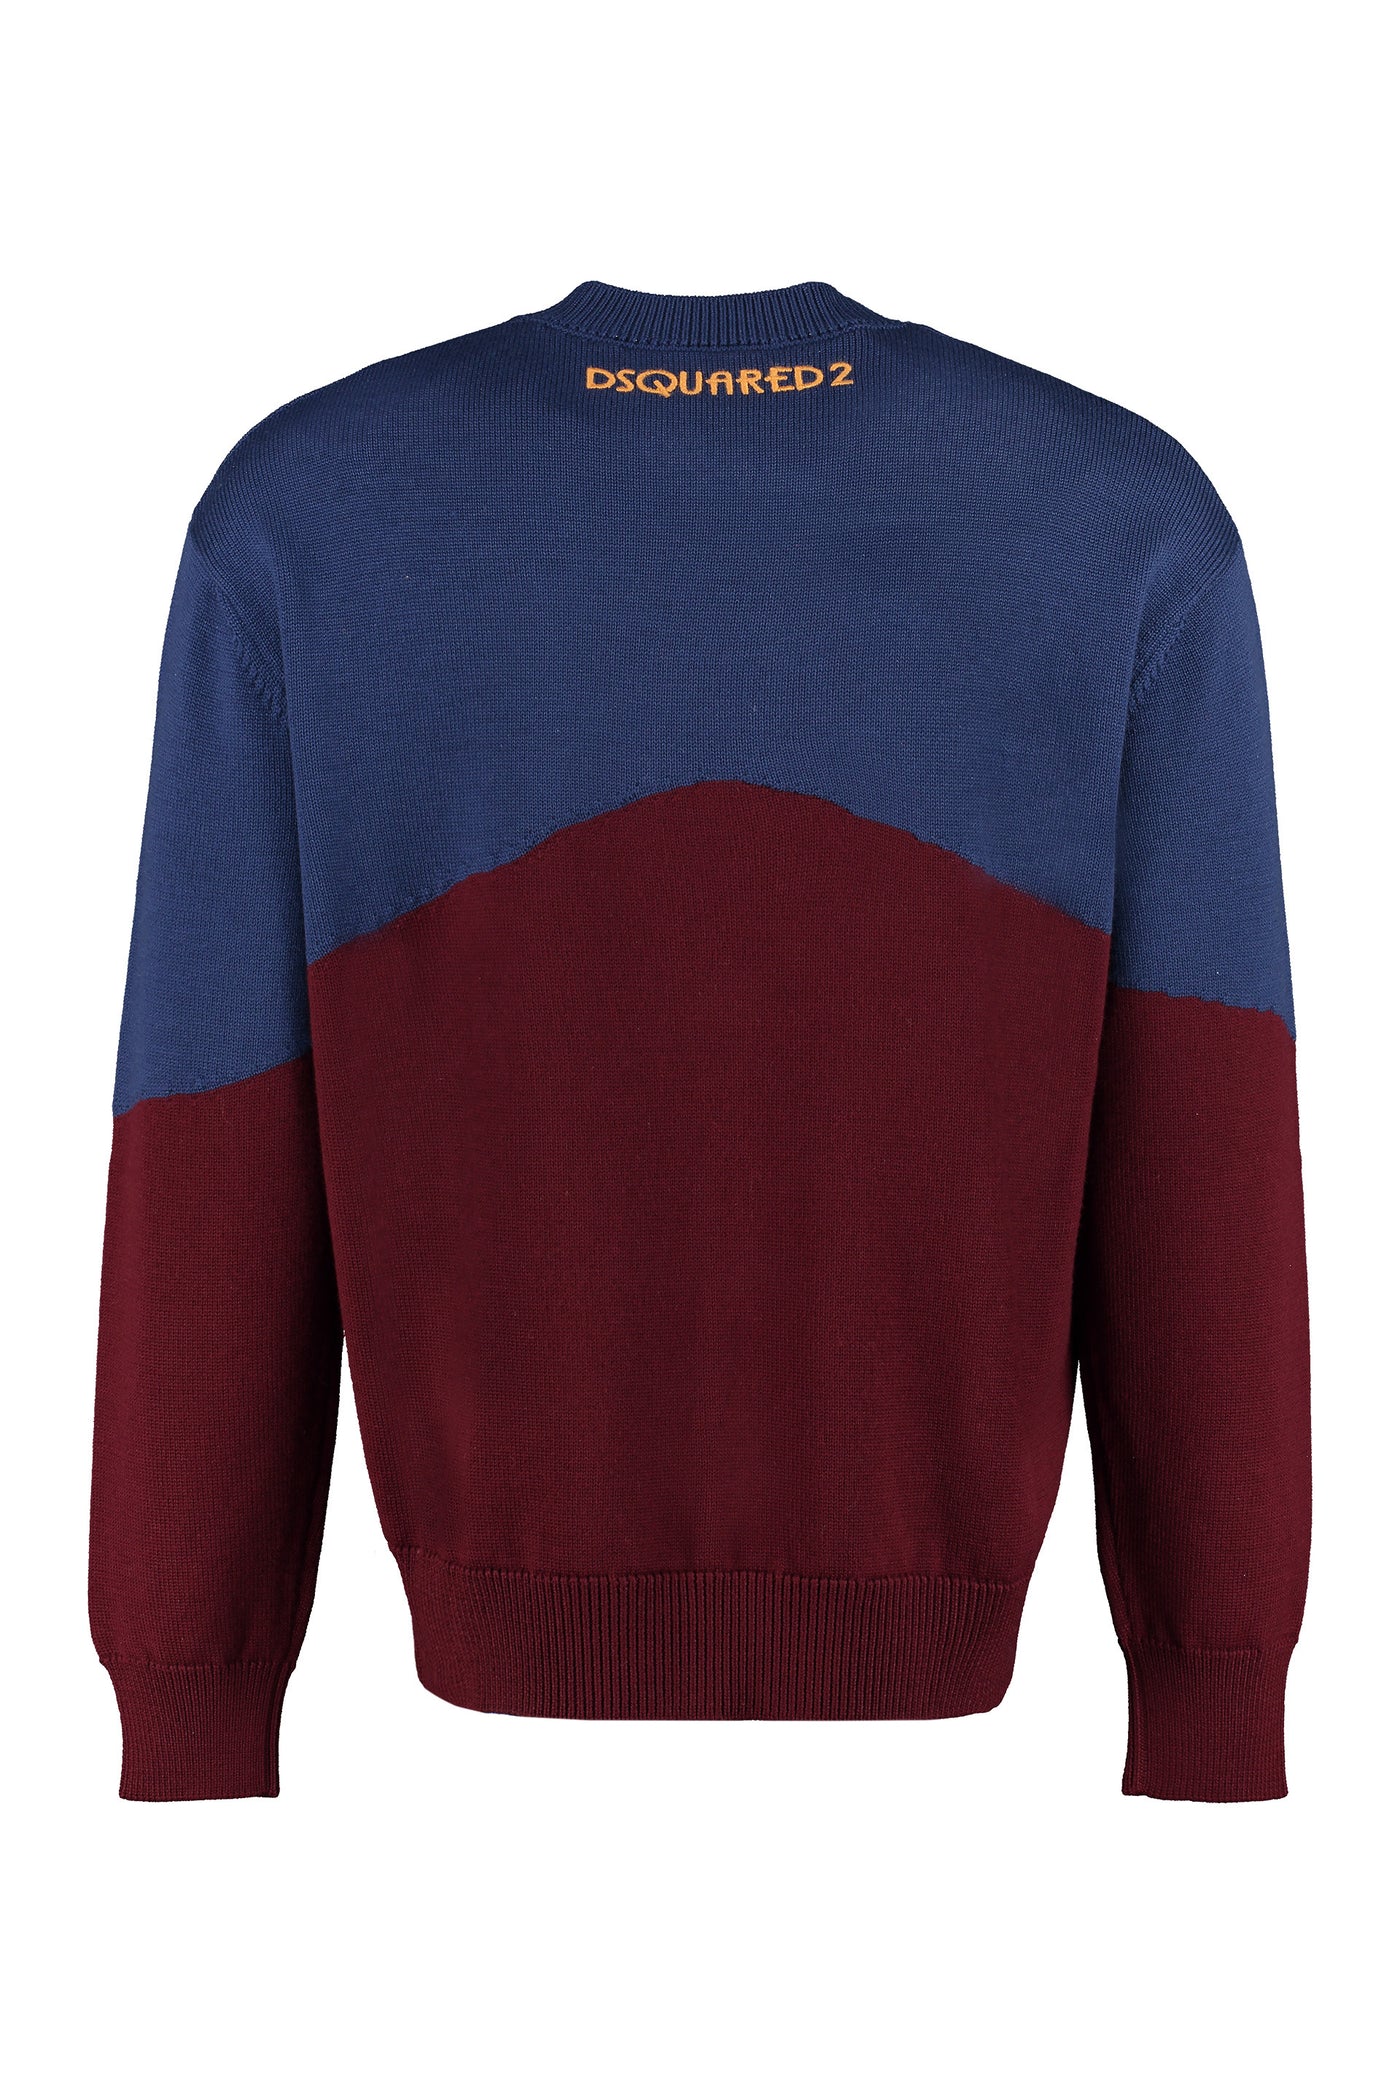 961 DSQUARED2 WOOL AND CASHMERE PULLOVER